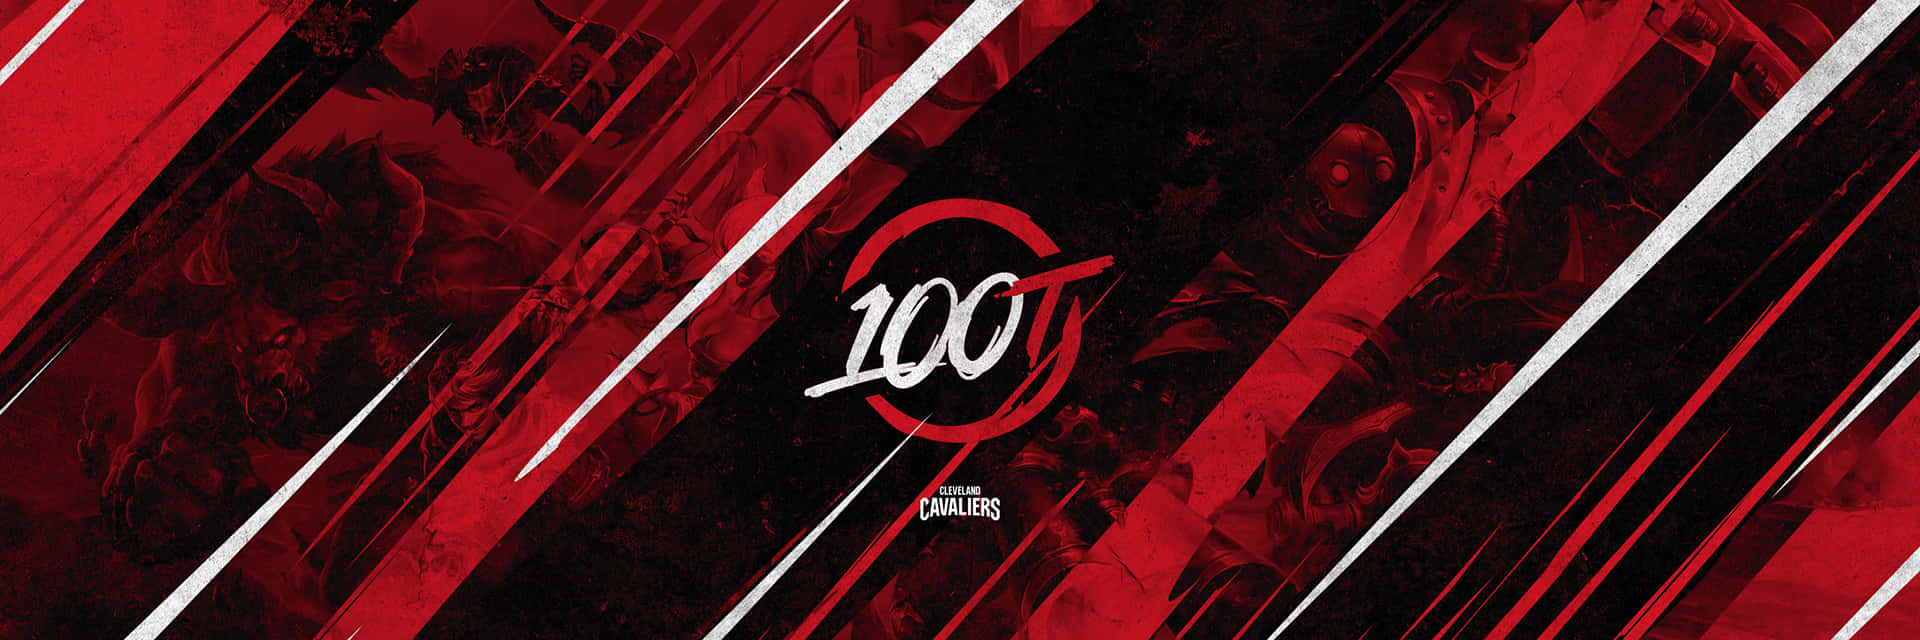 Representing 100 Thieves - The Future of Esports&Streetwear Wallpaper